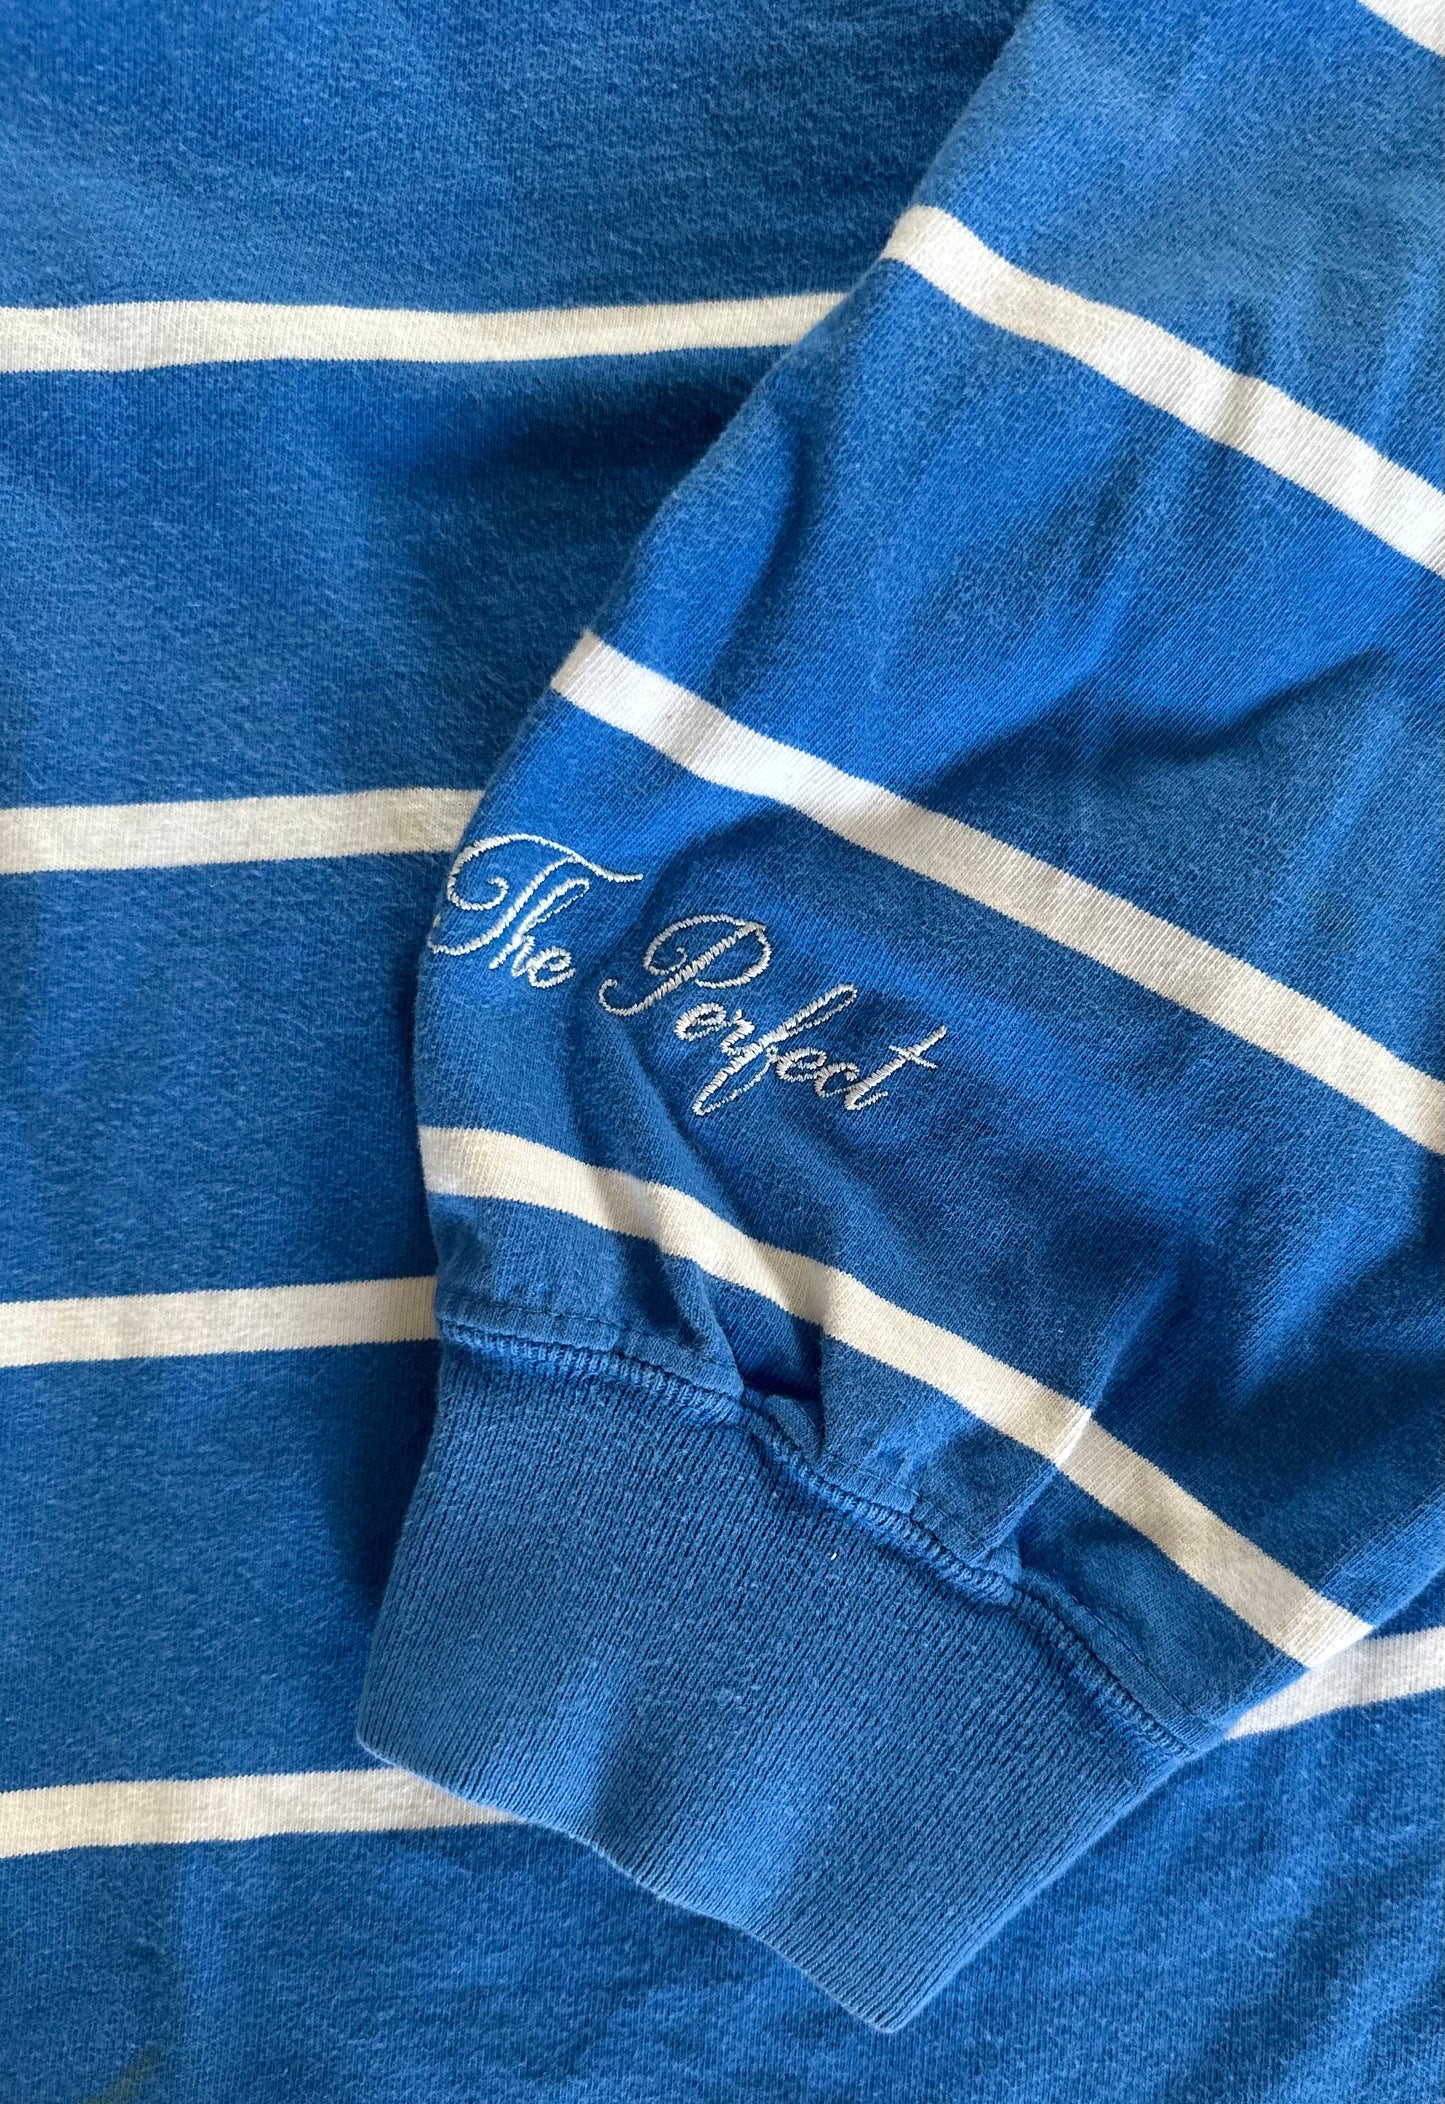 The Perfect Vintage Cobalt Blue Rugby Shirt